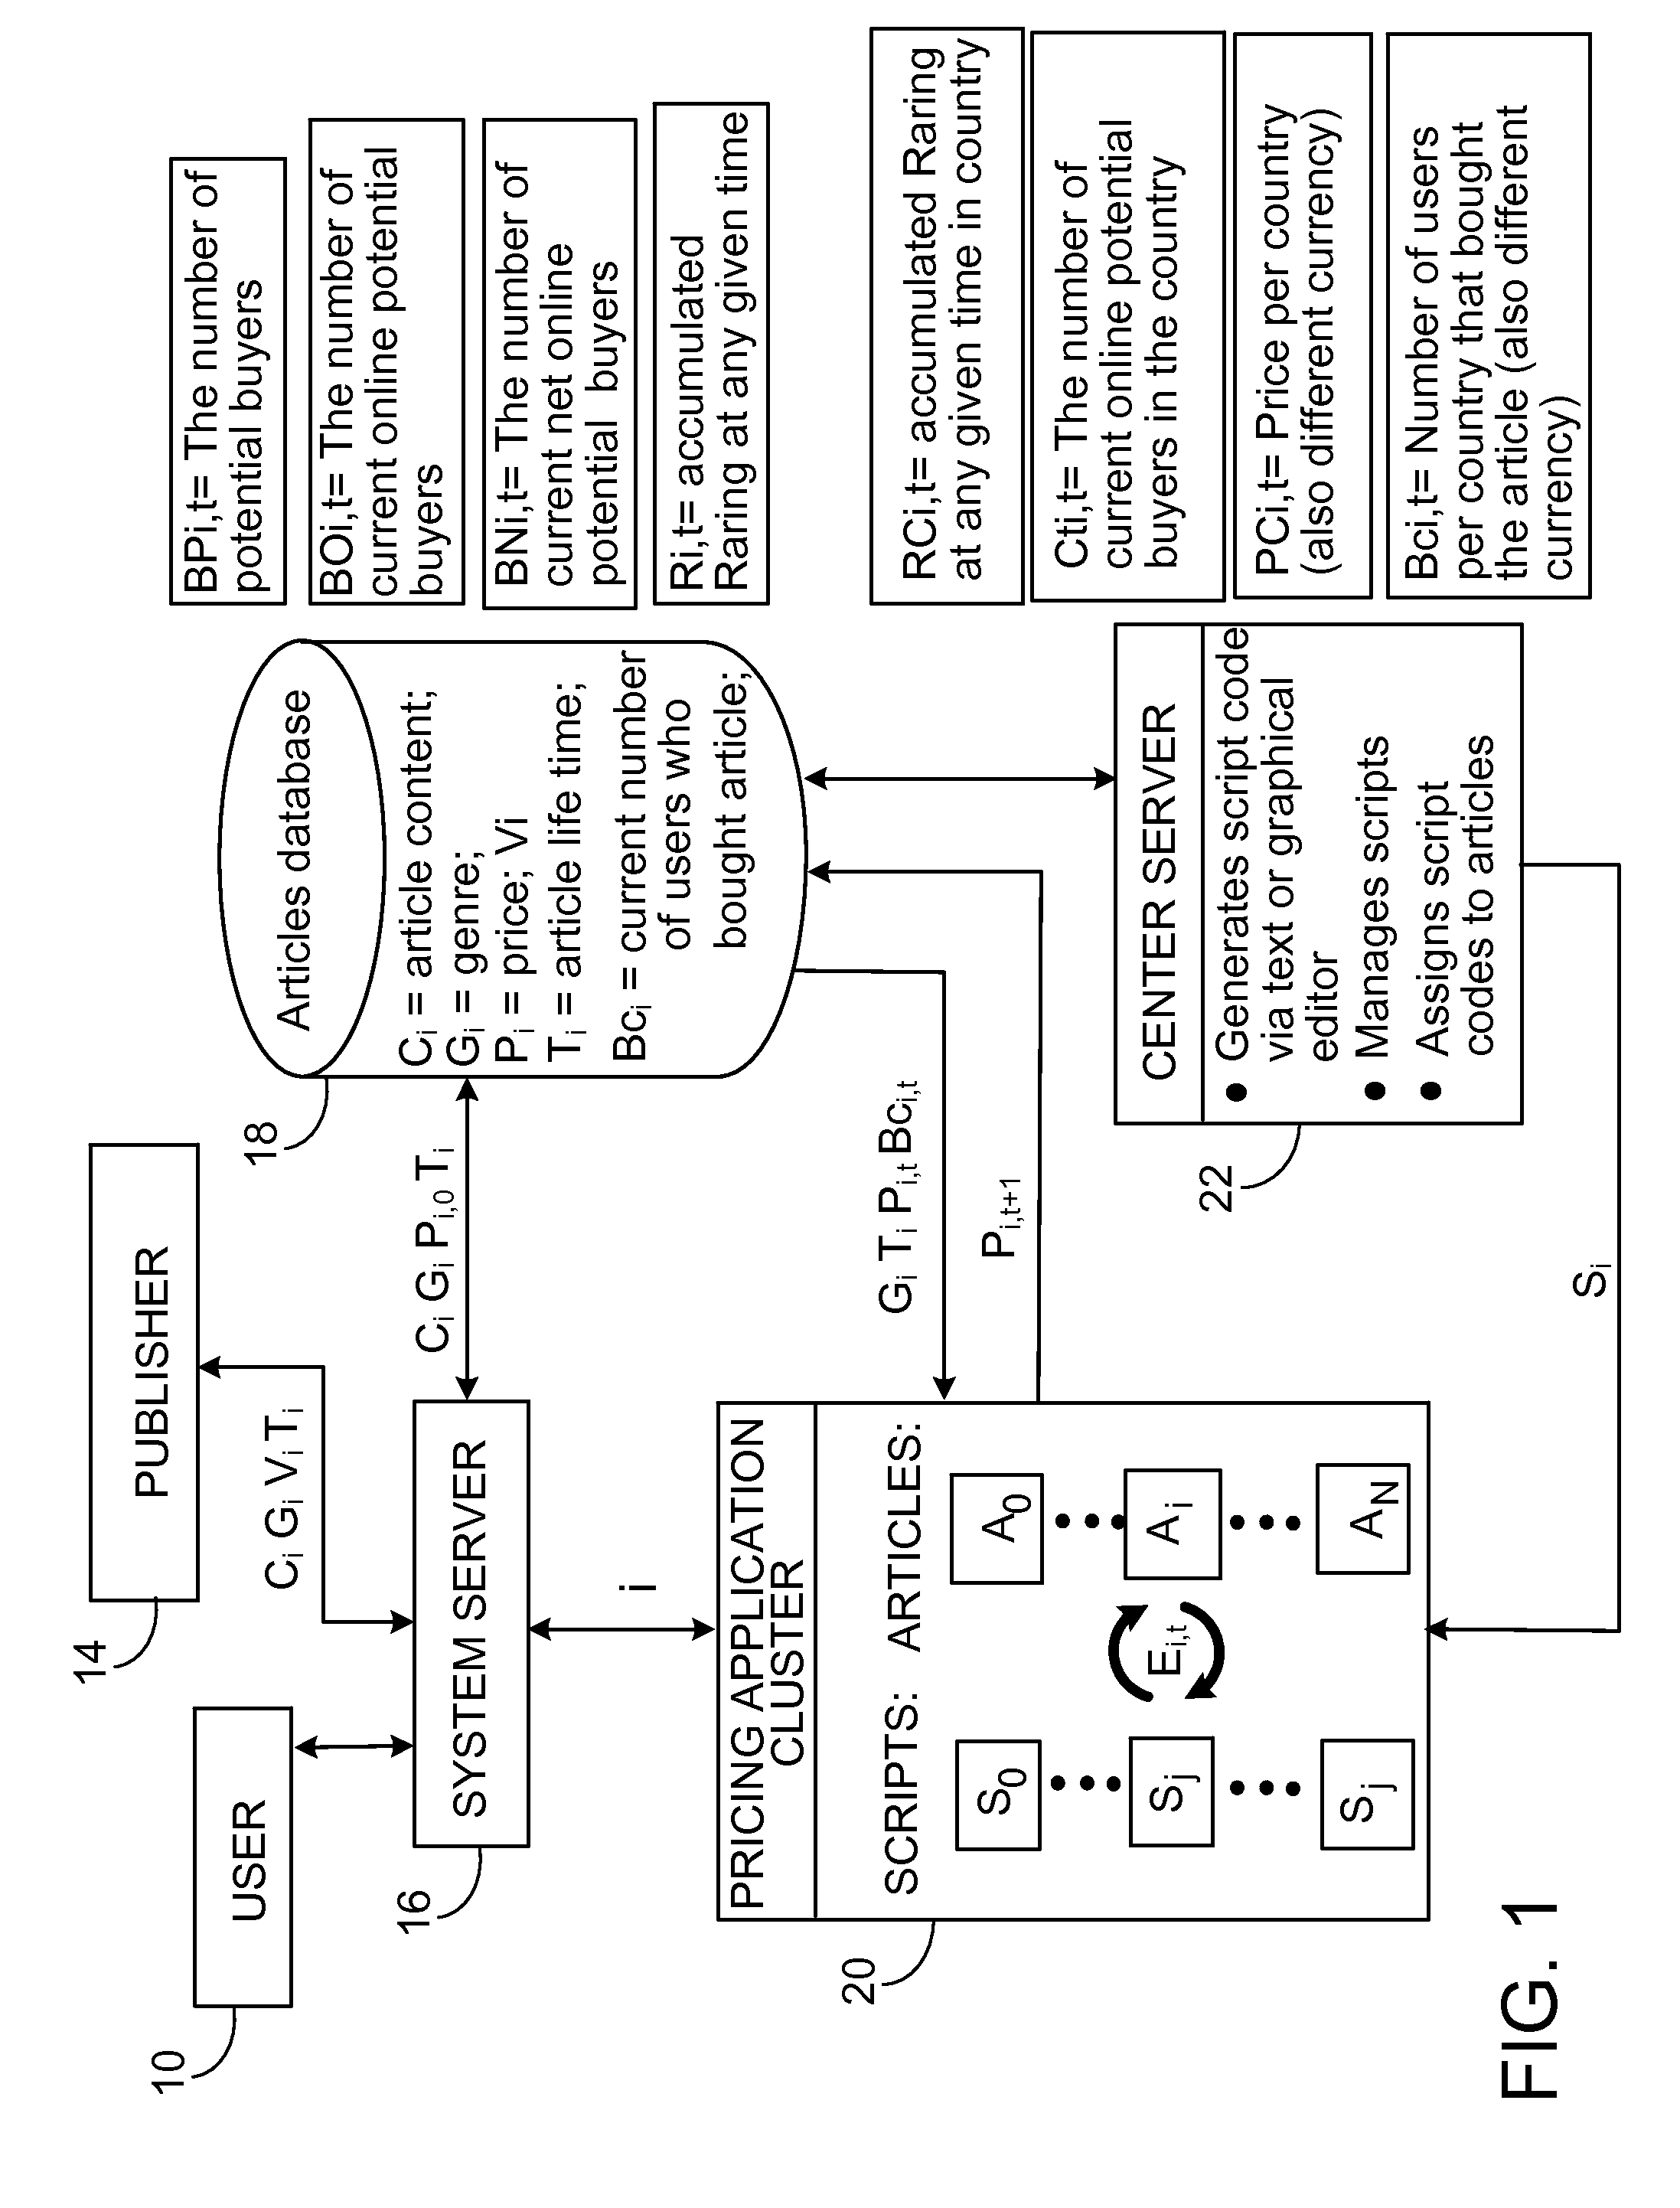 Determination of initial value for automated delivery of news items